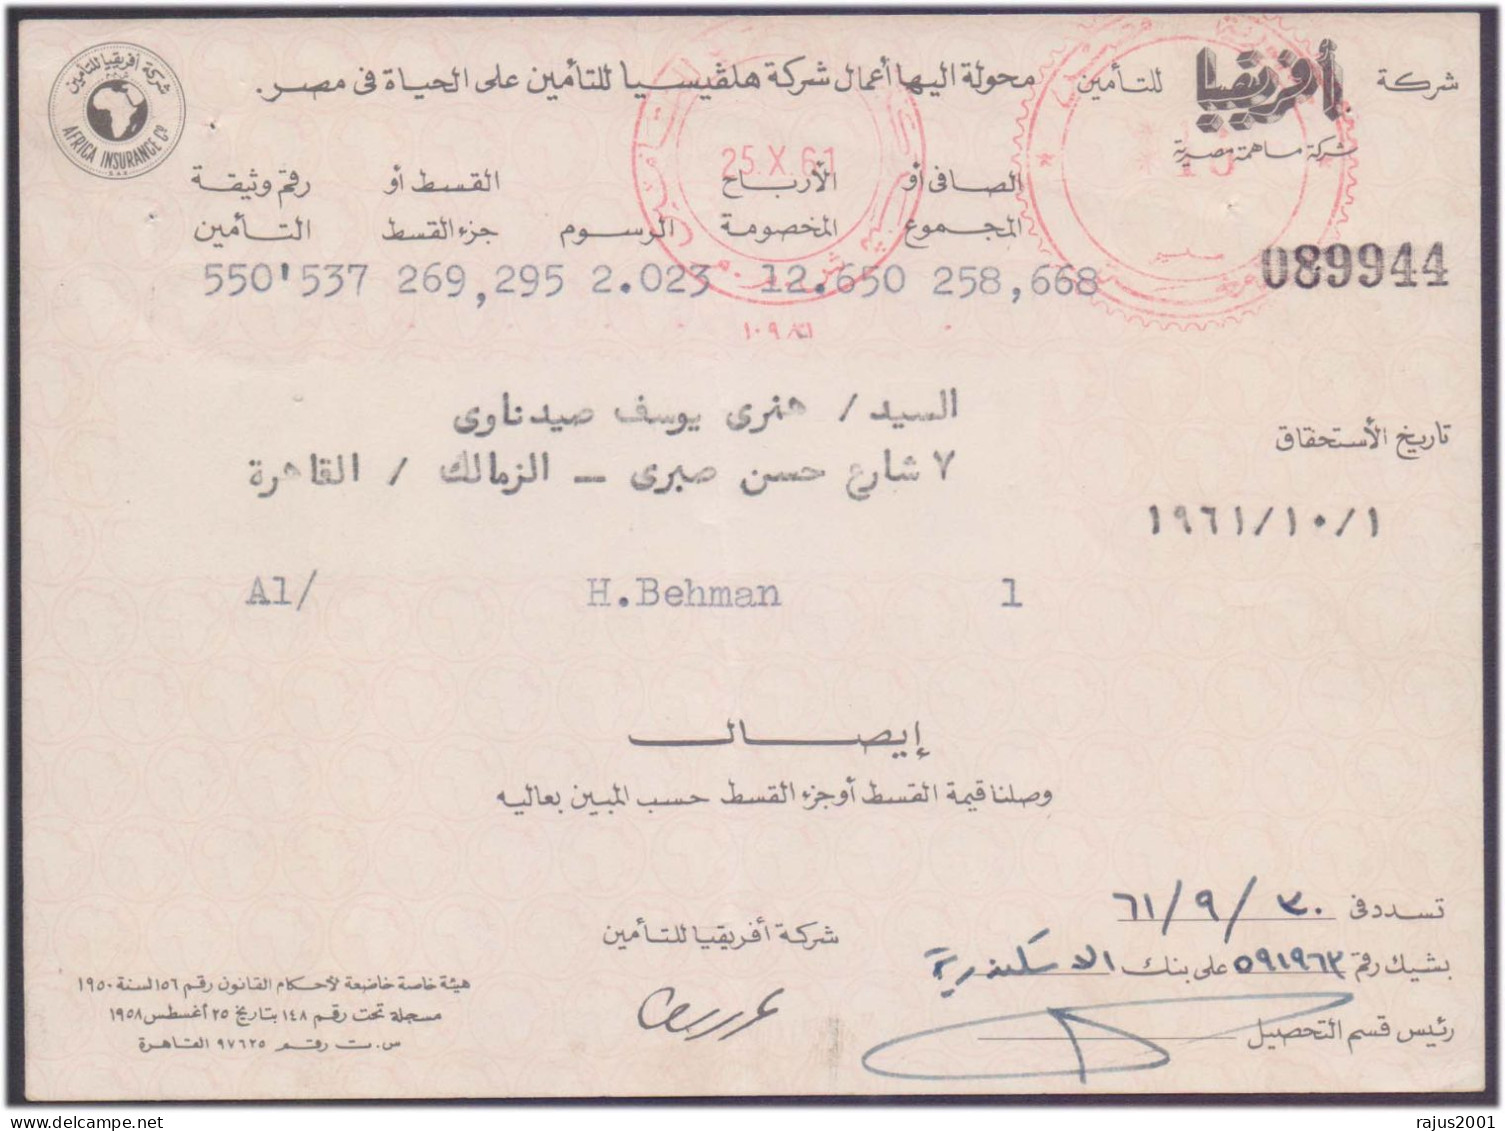 Business Of Helqisia Life Insurance Company In Egypt, RED METER FRANK, EMA, Receipt Old Document Egypt 1960 - Cartas & Documentos